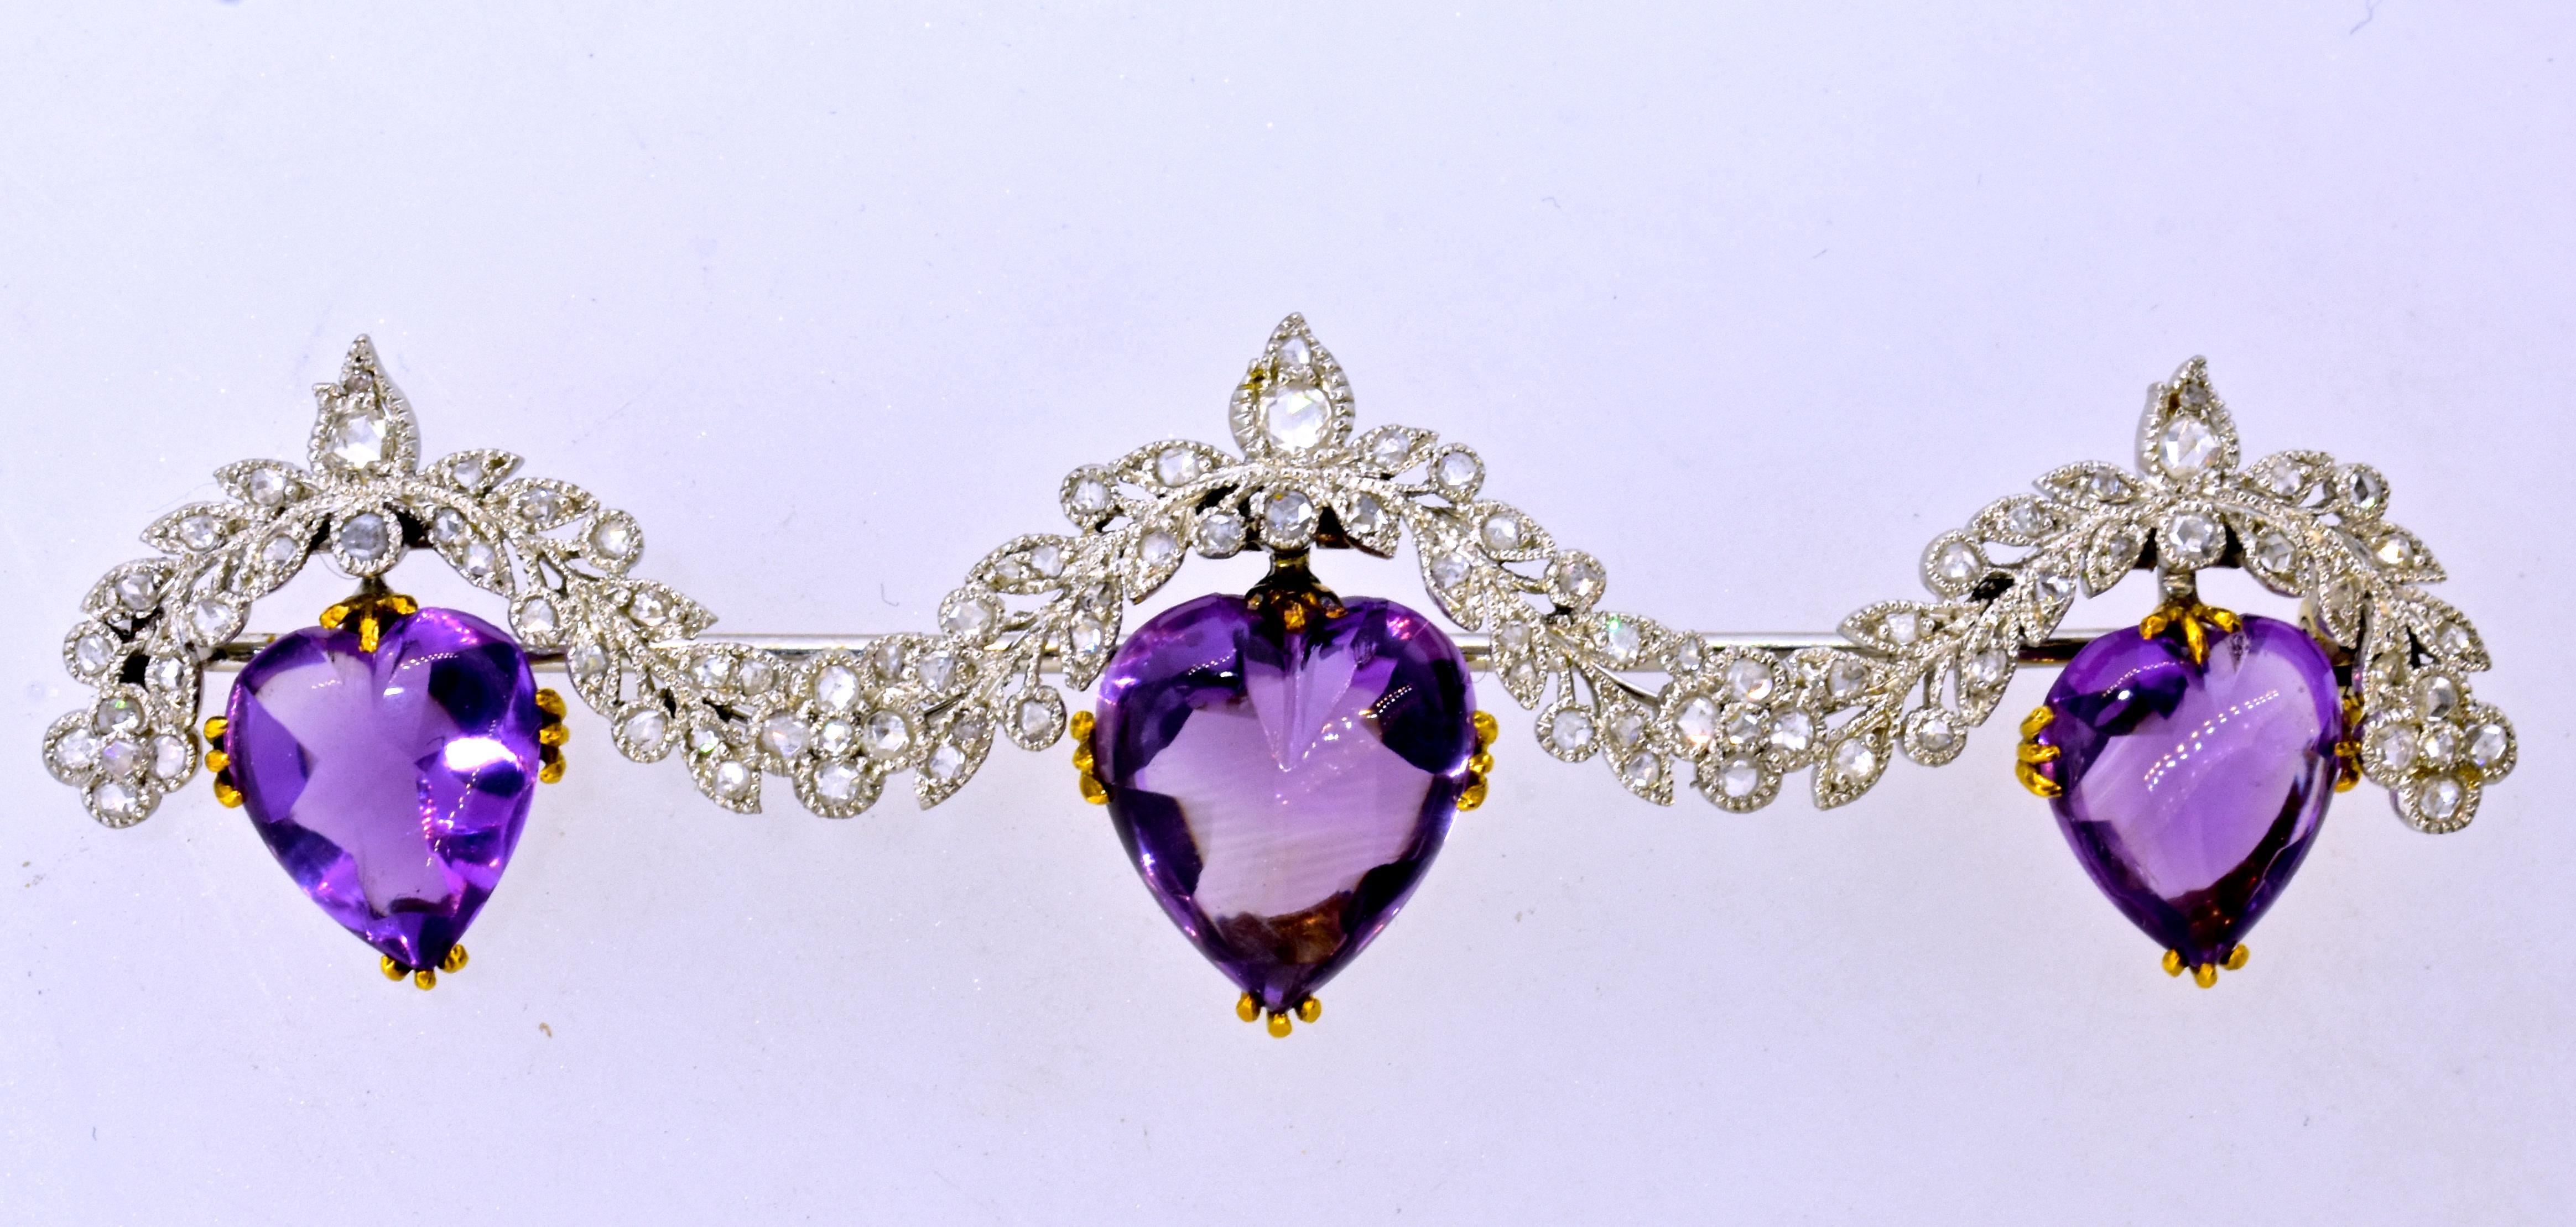 Women's Antique Heart shaped Amethyst Brooch with Diamond, Edwardian, circa 1910 For Sale